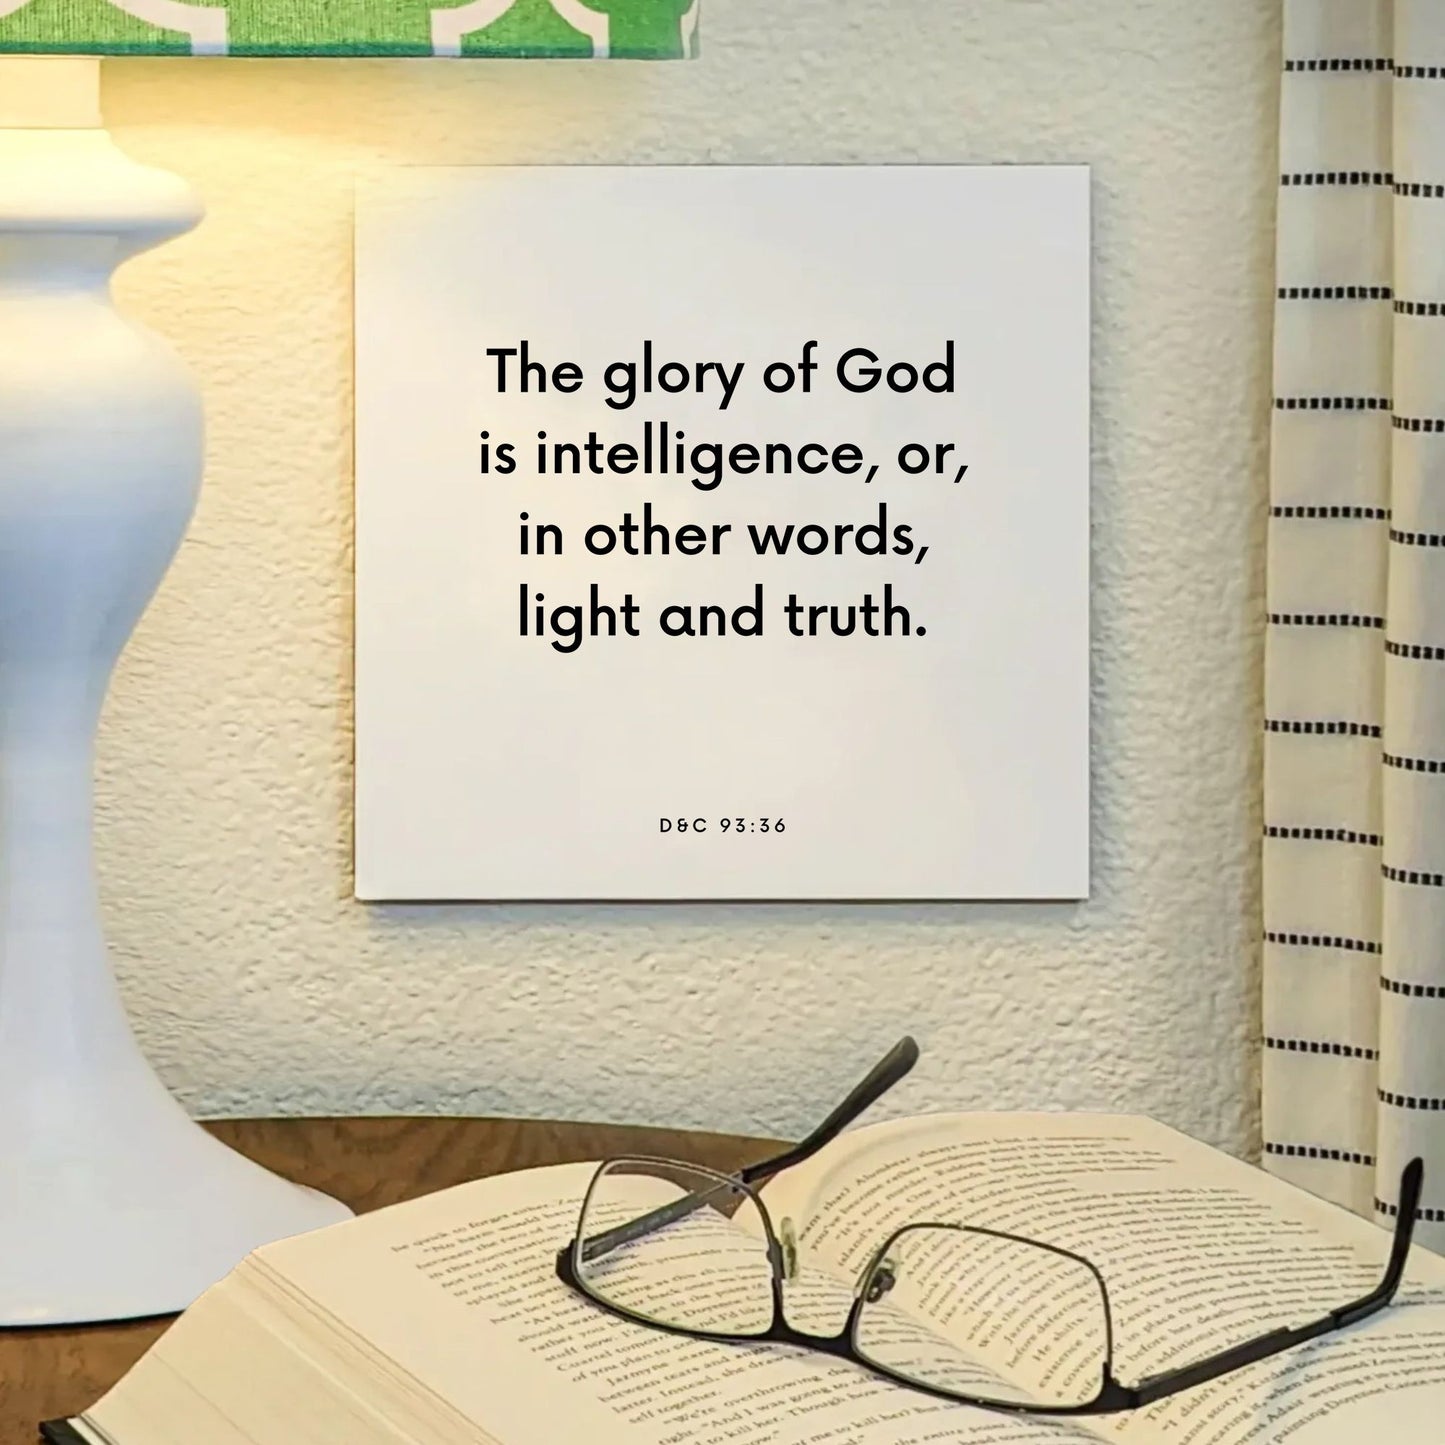 Lamp mouting of the scripture tile for D&C 93:36 - "The glory of God is intelligence"